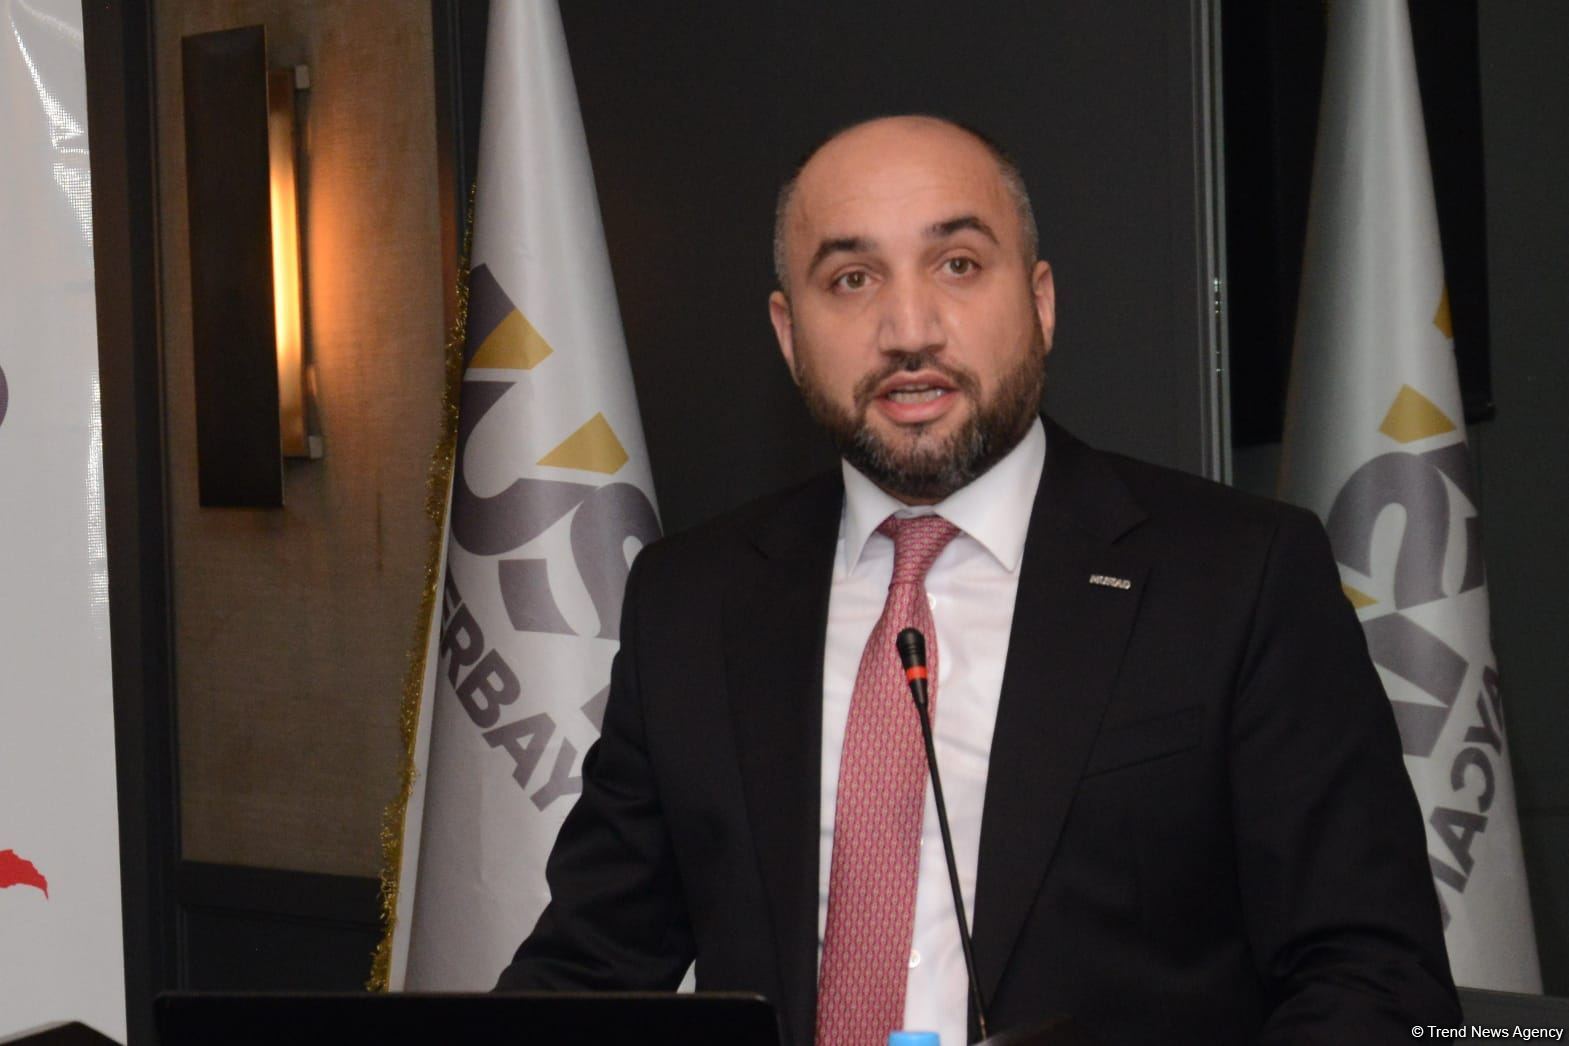 The chief executive officer of Polymart LLC was elected as the new head of MUSIAD Azerbaijan - 